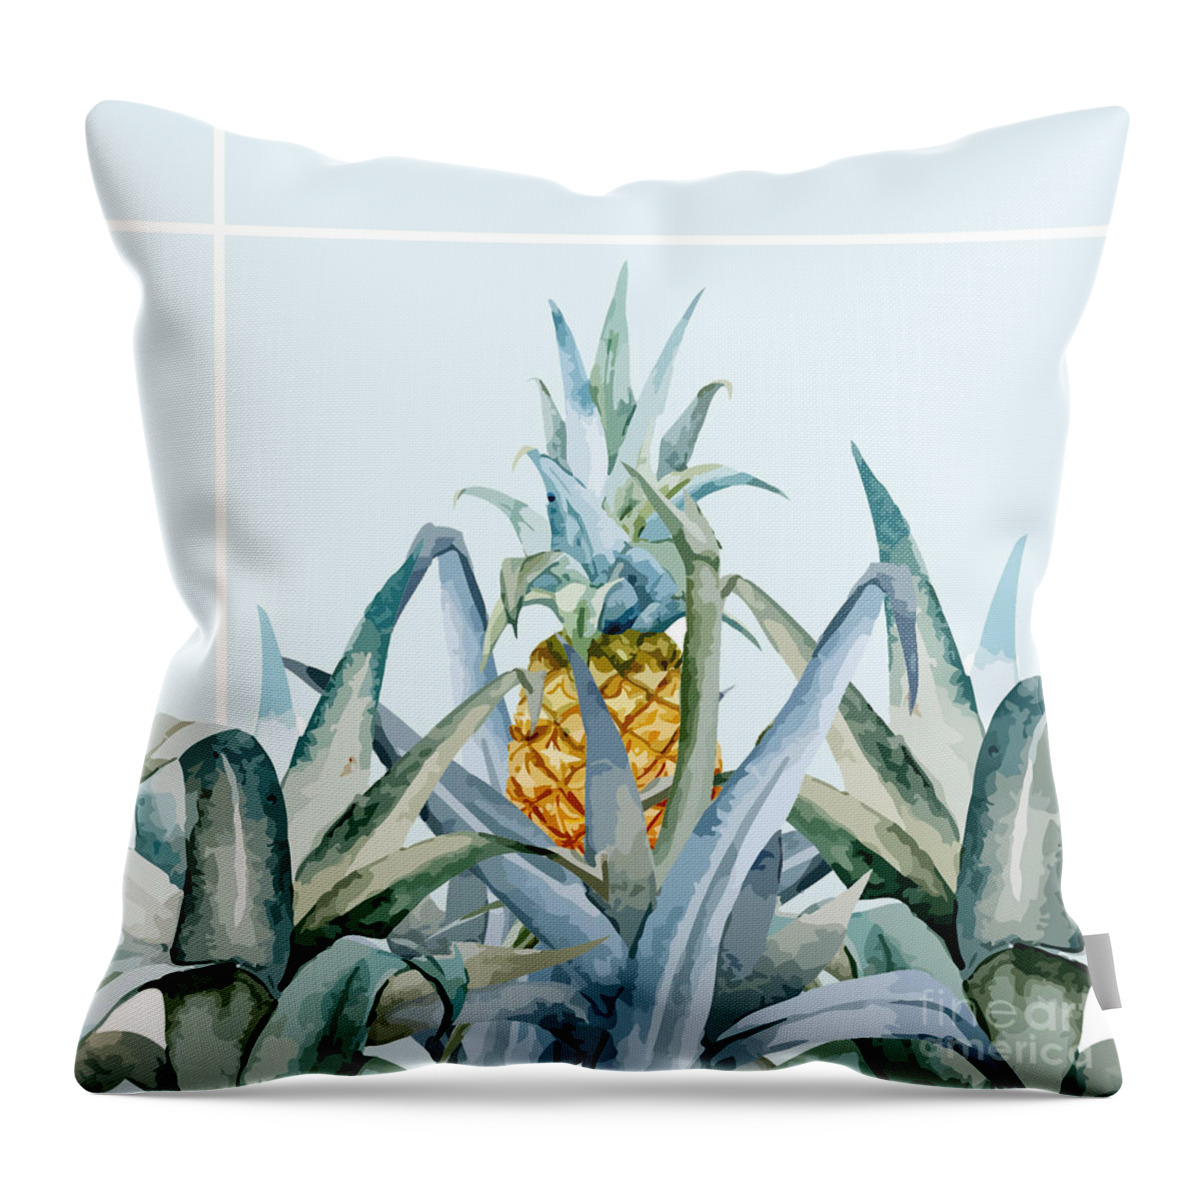 Summer Throw Pillow featuring the painting Tropical Feeling by Mark Ashkenazi